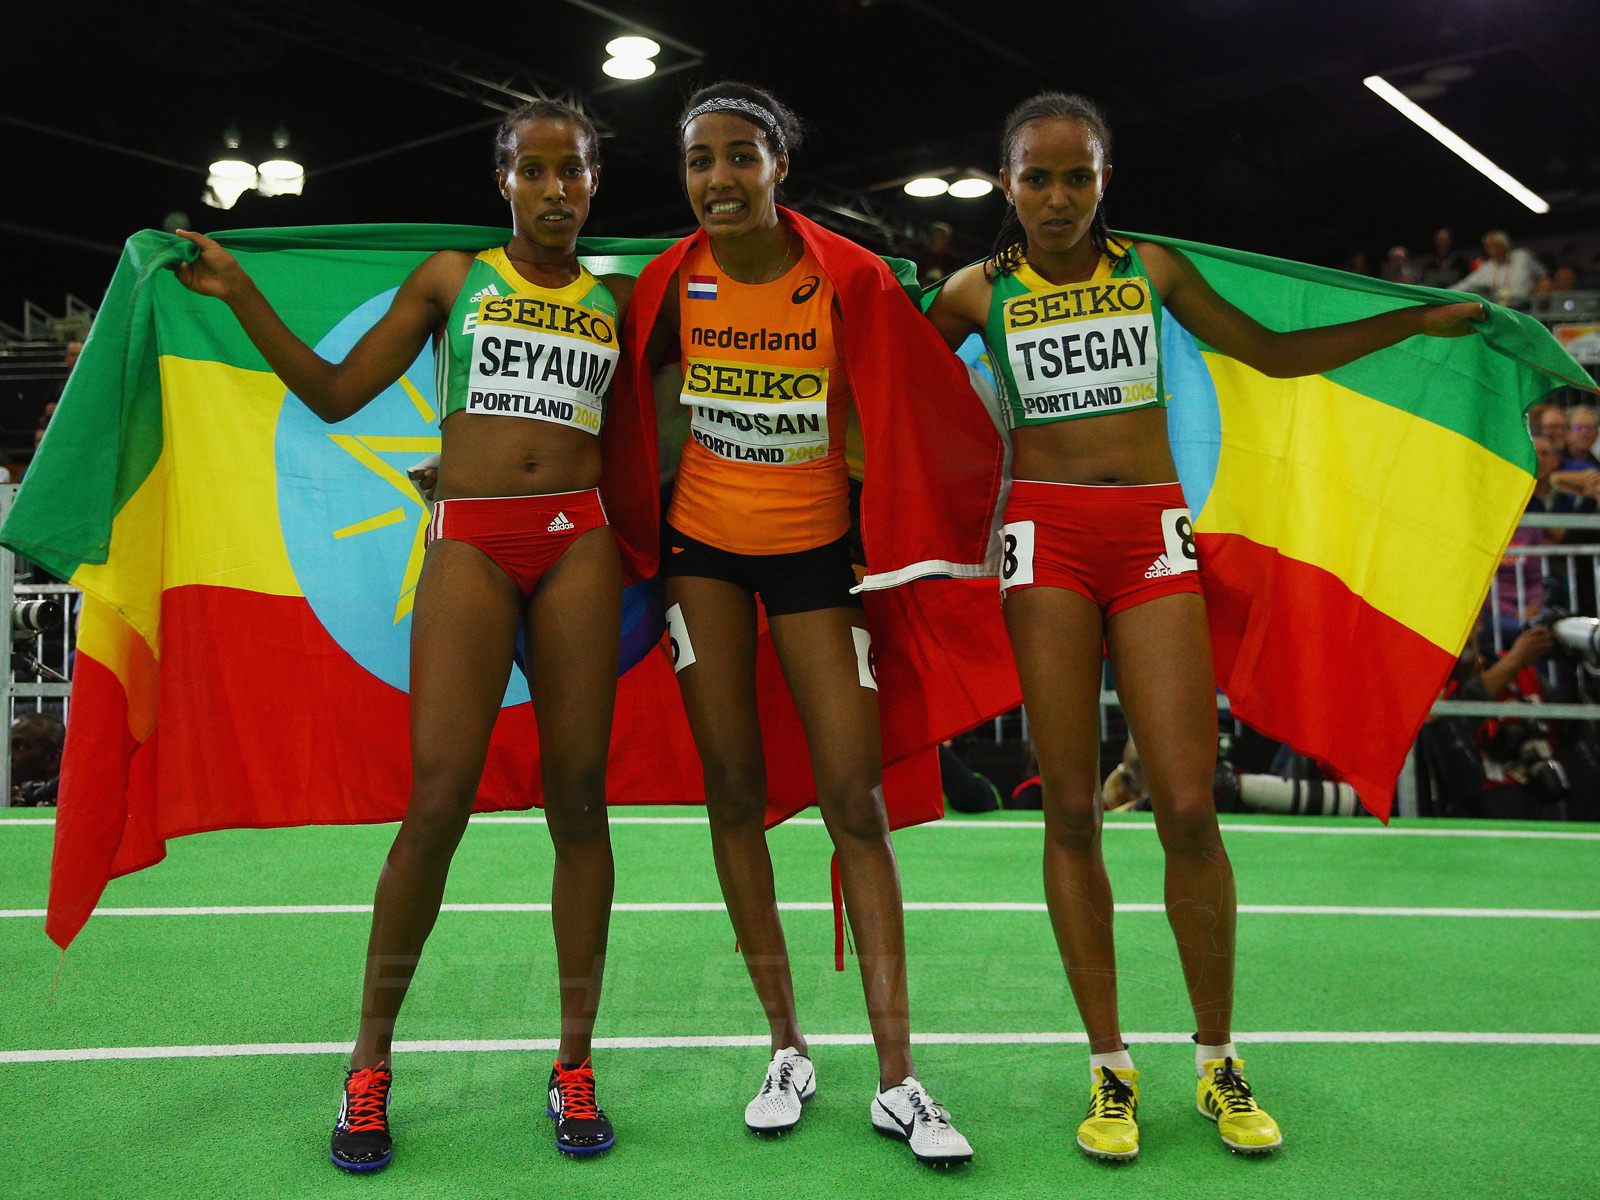 Dawit Seyaum, Sifan Hassan and Gudaf Tsegay pose for camera after the women's 1500m final at Portland 2016 / Photo credit: Getty Images for the IAAF.